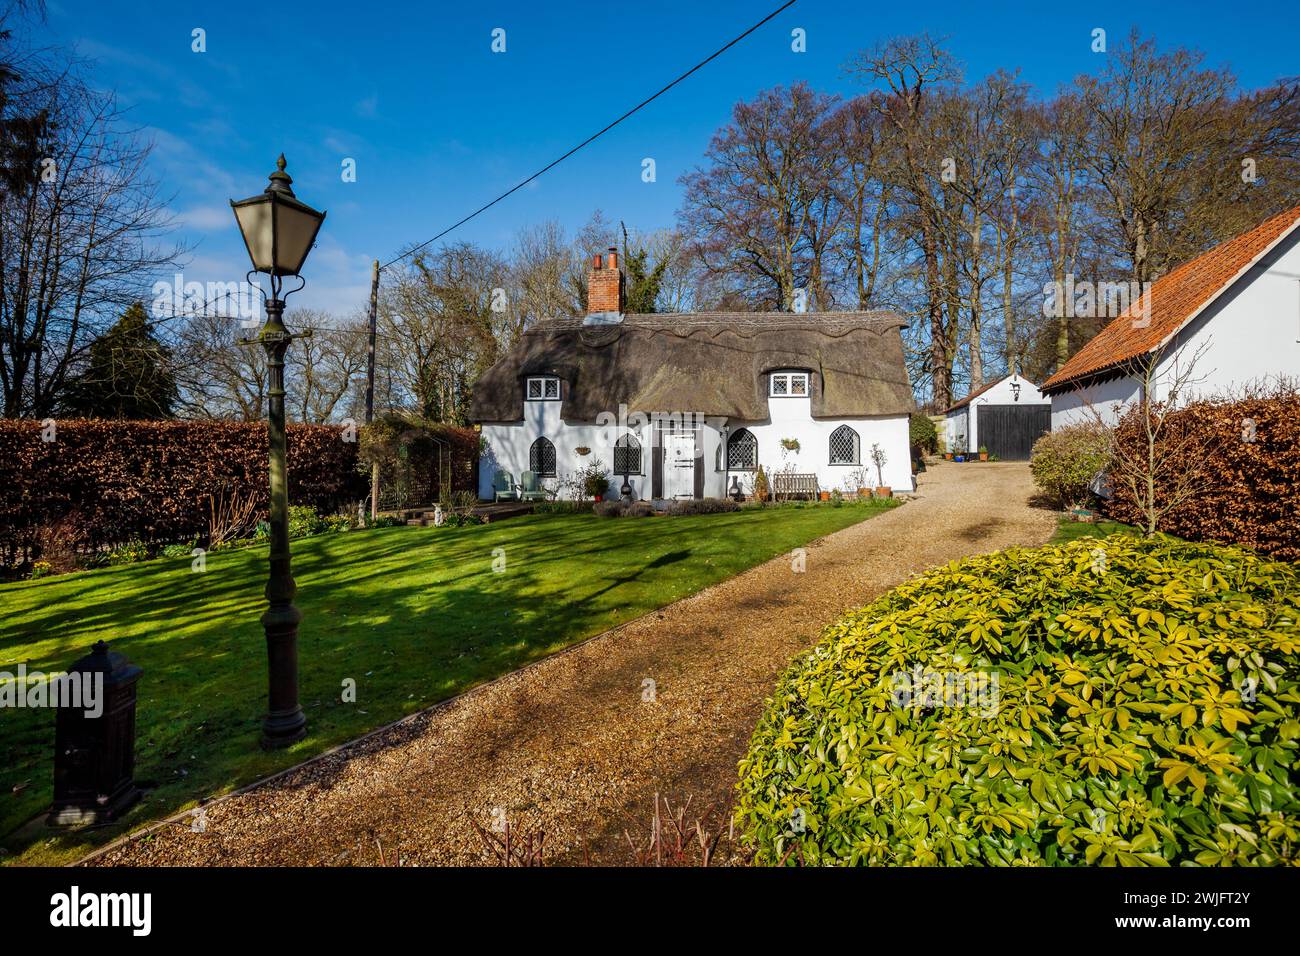 Dalham, Suffolk, England - Feb 19 2016: 16th Century thatched grade II listed cottage Stock Photo